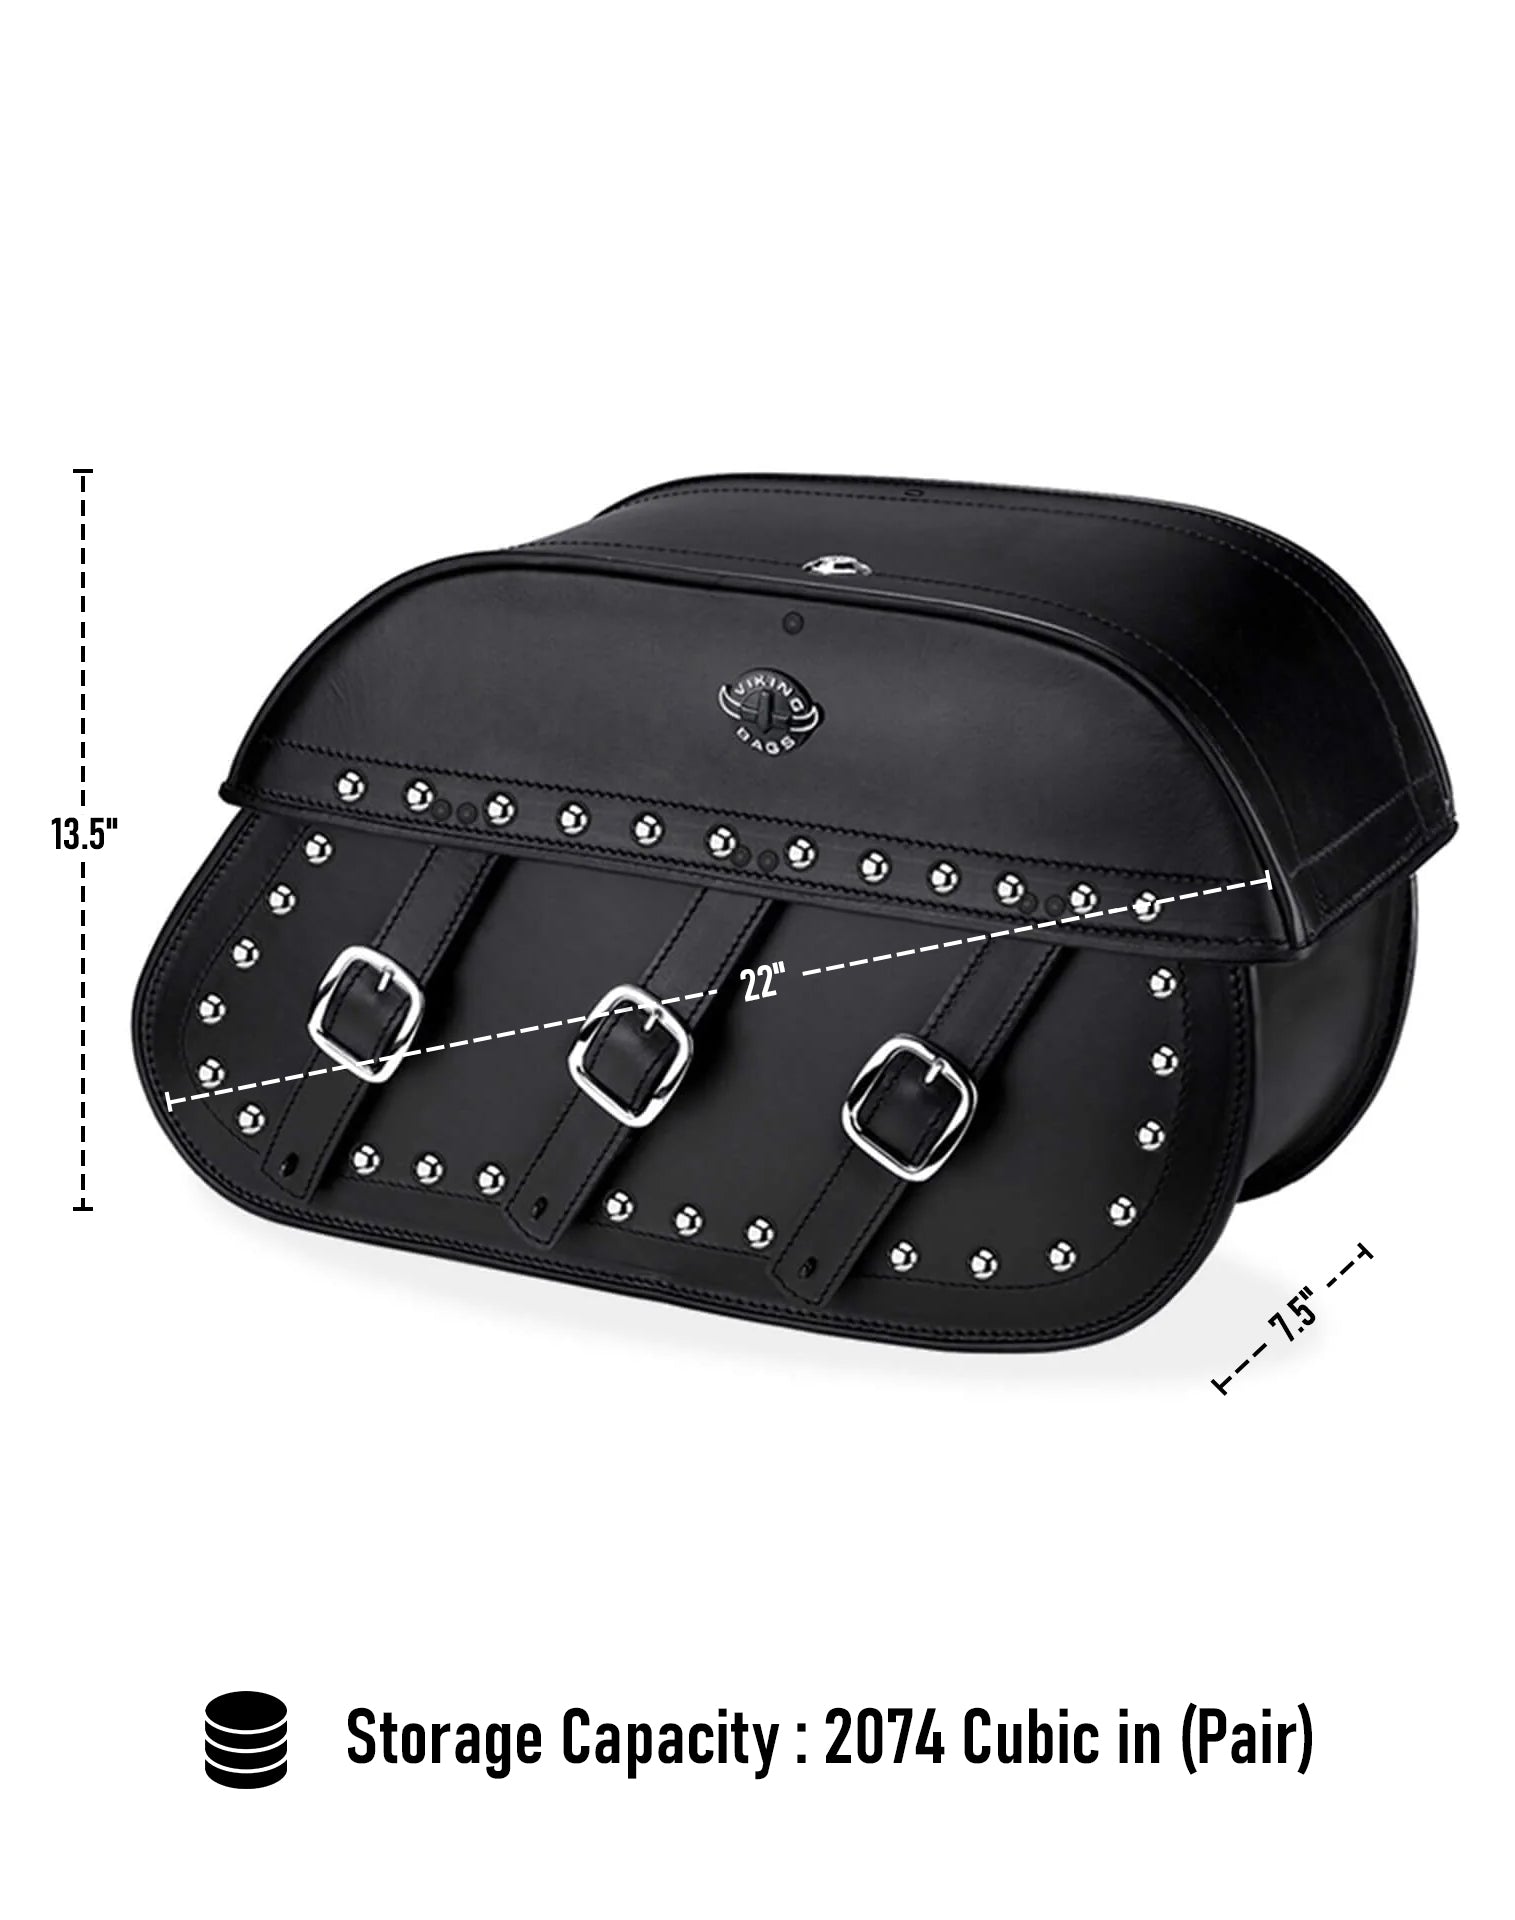 Viking Trianon Extra Large Yamaha V Star 1300 Tourer Studded Leather Motorcycle Saddlebags Can Store Your Ridings Gears